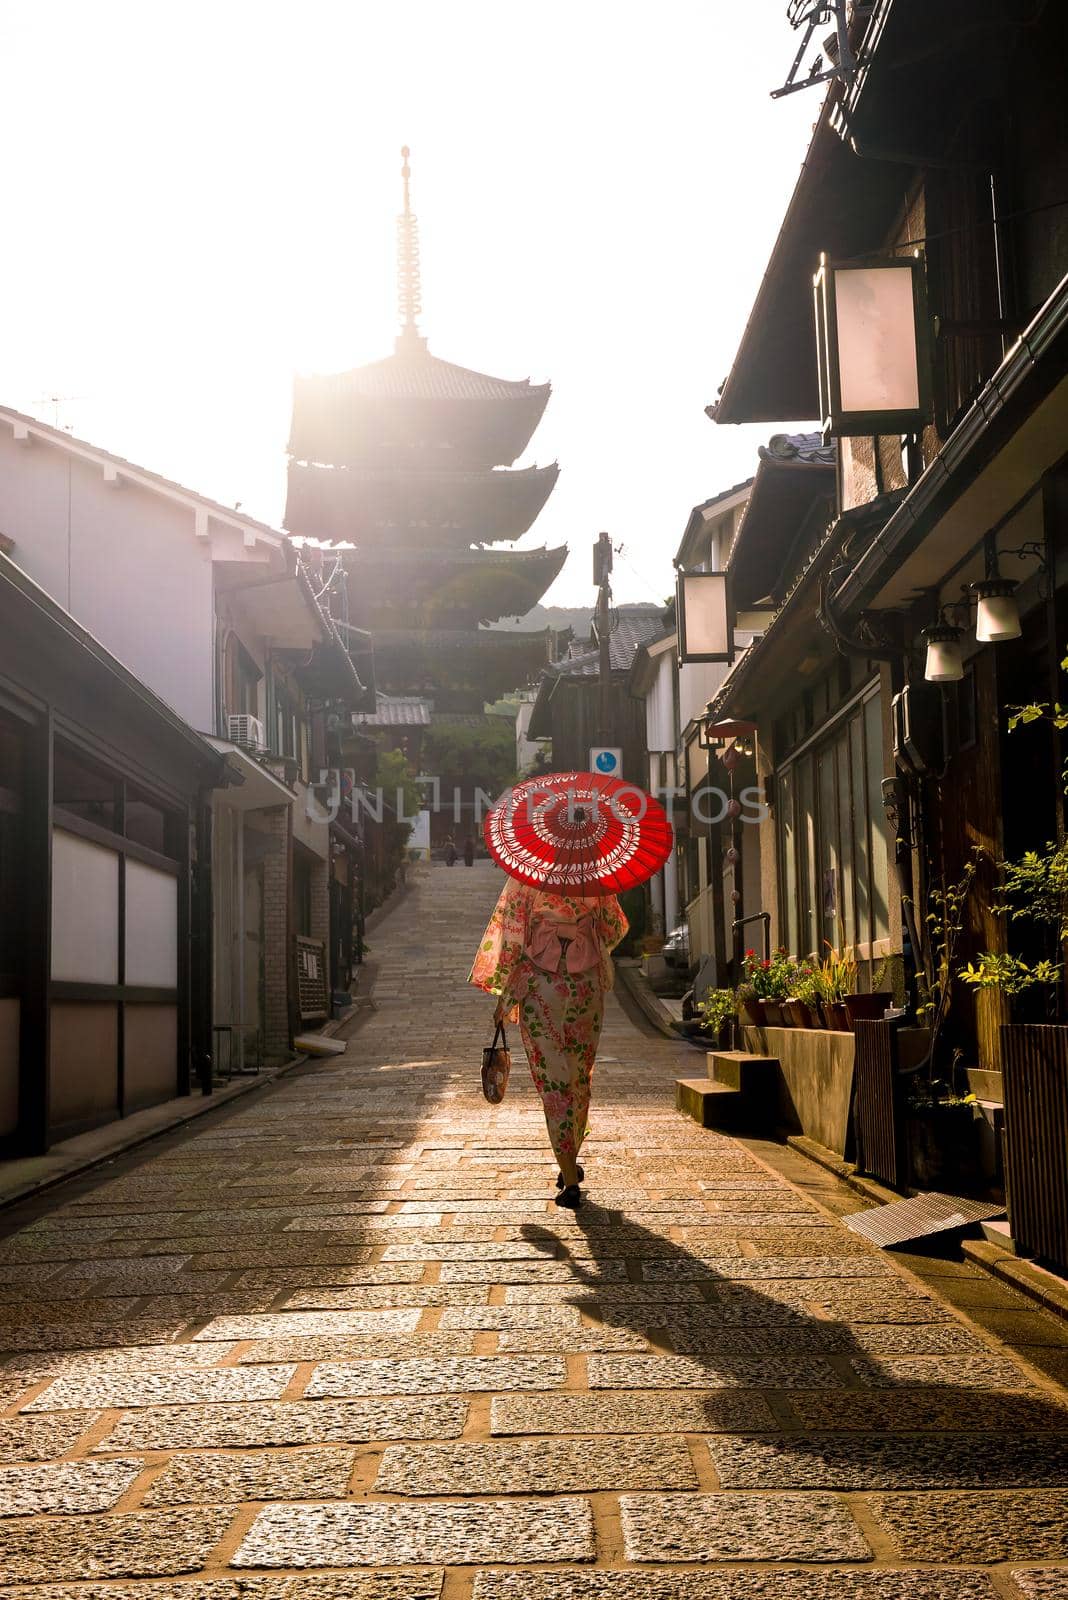 Japanese girl in Yukata with red umbrella in old town  Kyoto, Japan